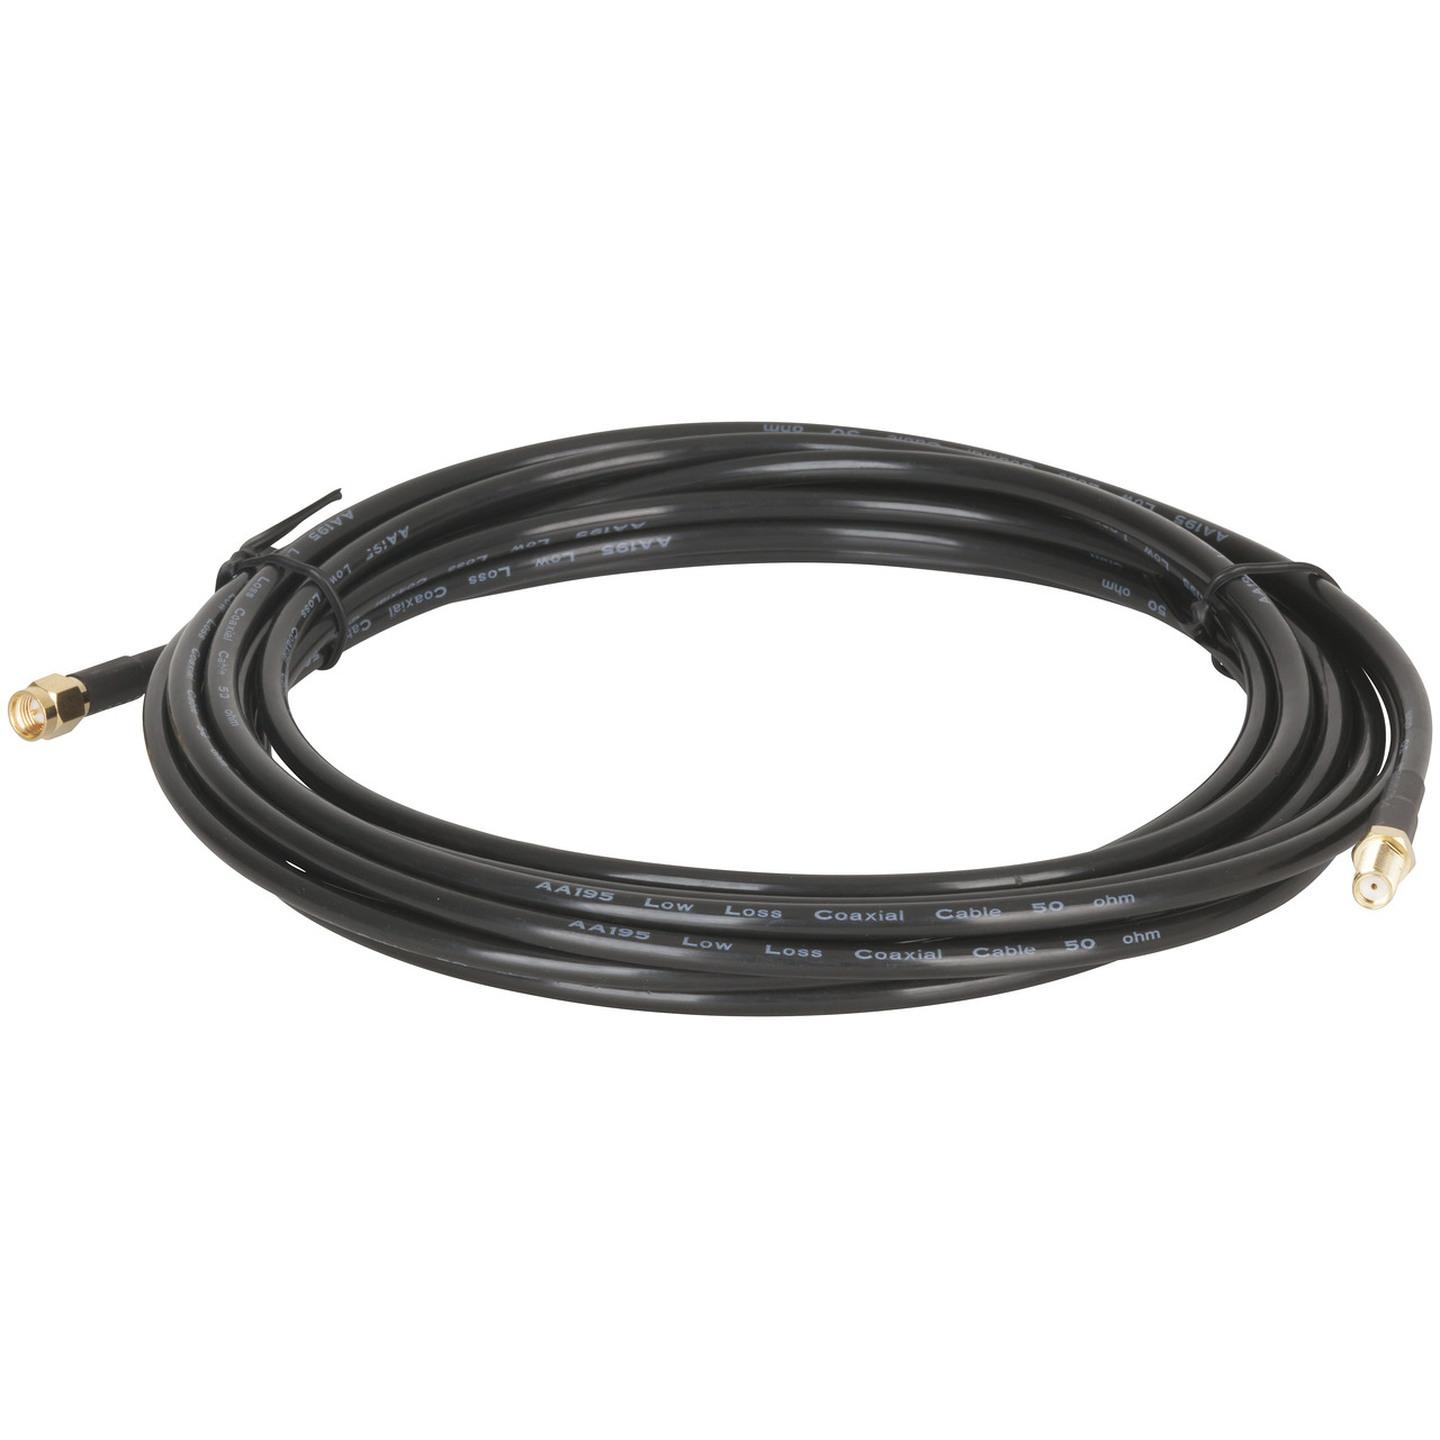 Low Loss SMA Extension Cable 5m